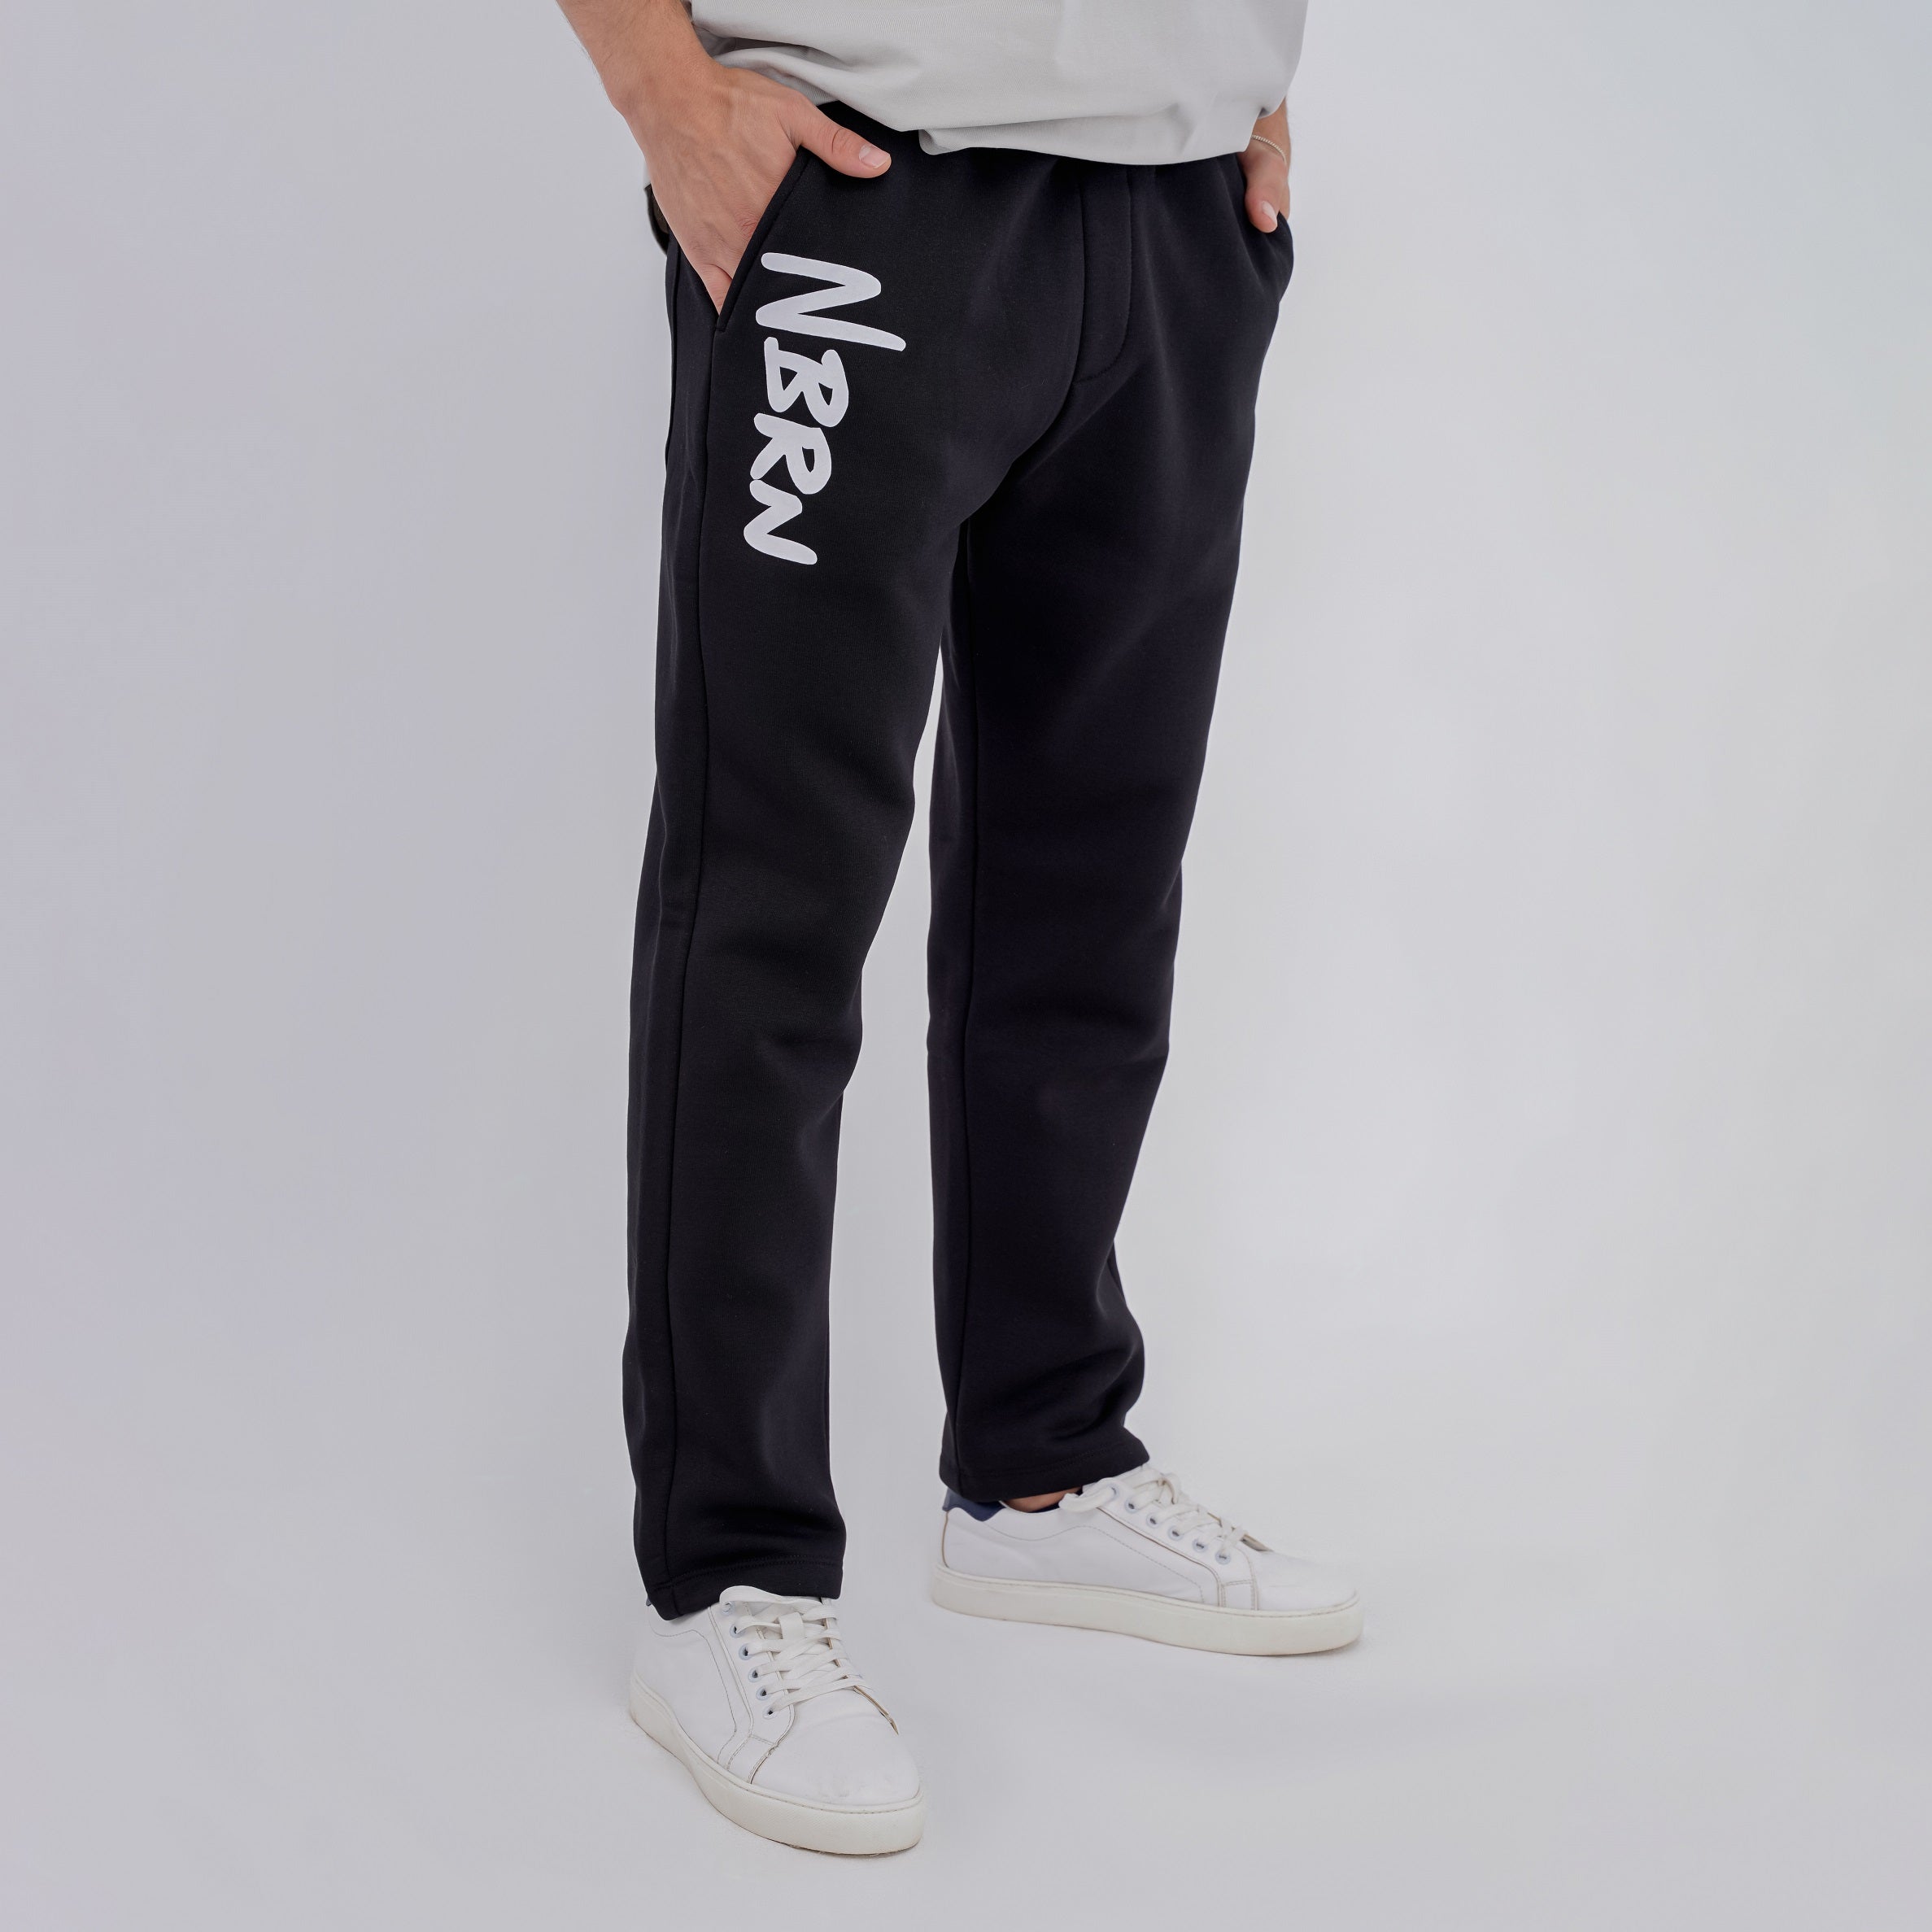 M24NT902-Sporty Sweatpants With drawstring